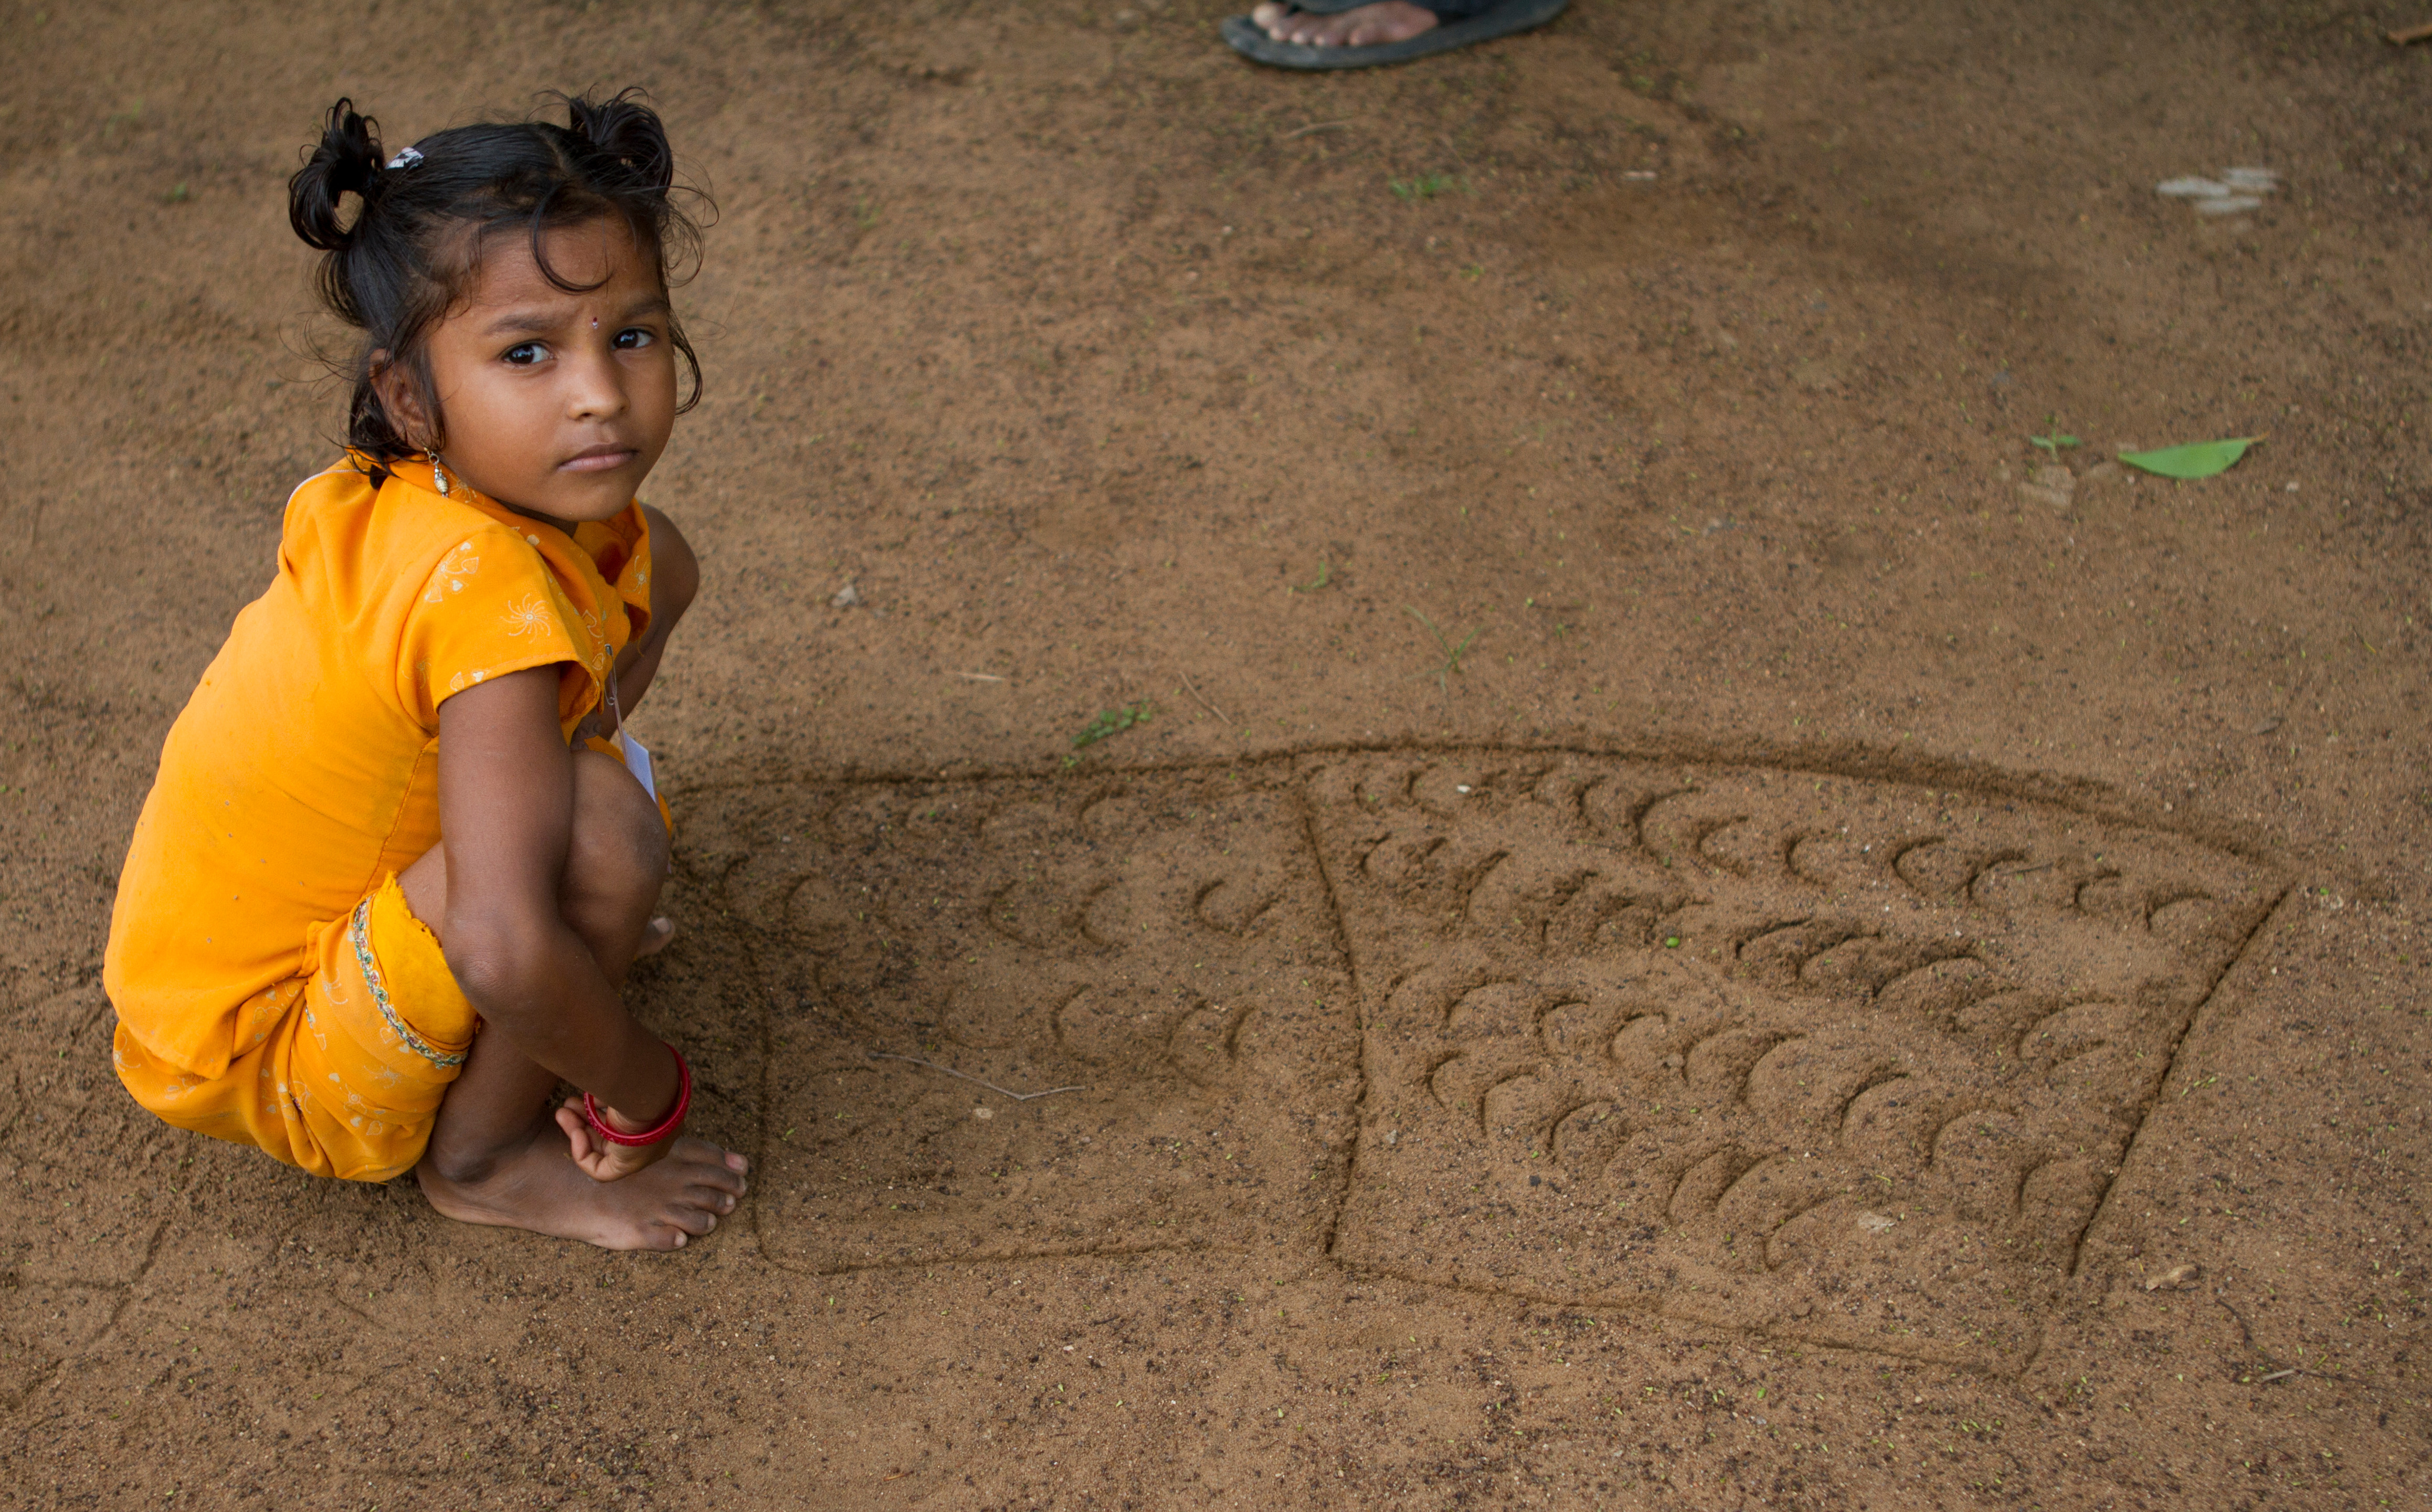 Little girl drawing in dirt